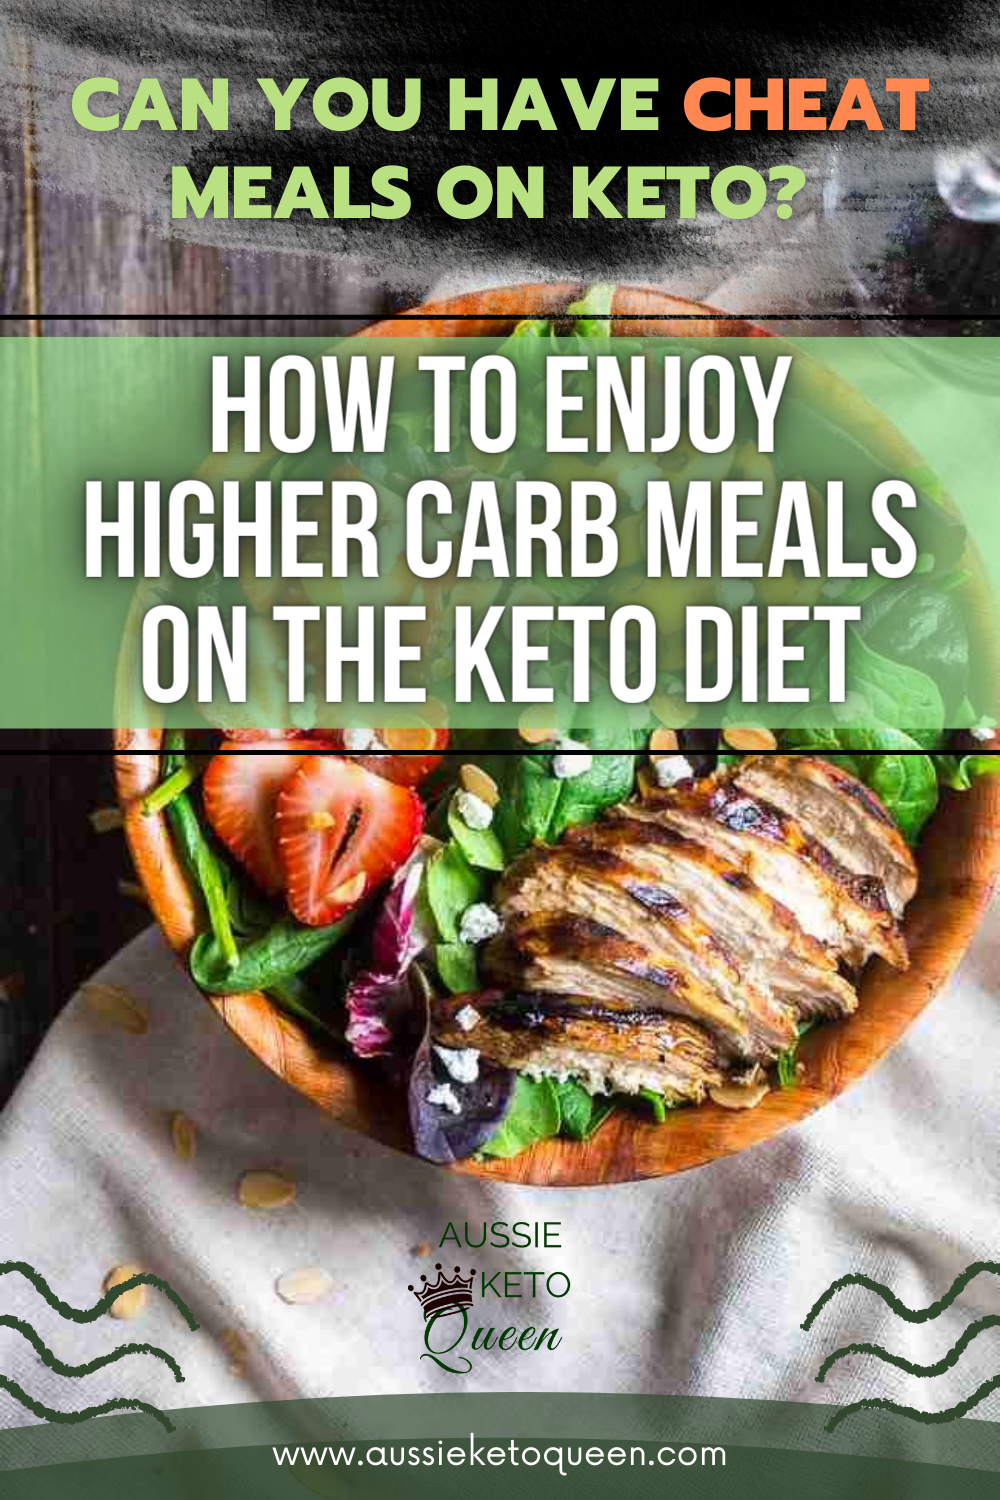 Can You Have Cheat Meals on Keto? How to Enjoy Higher Carb Meals on the Keto Diet